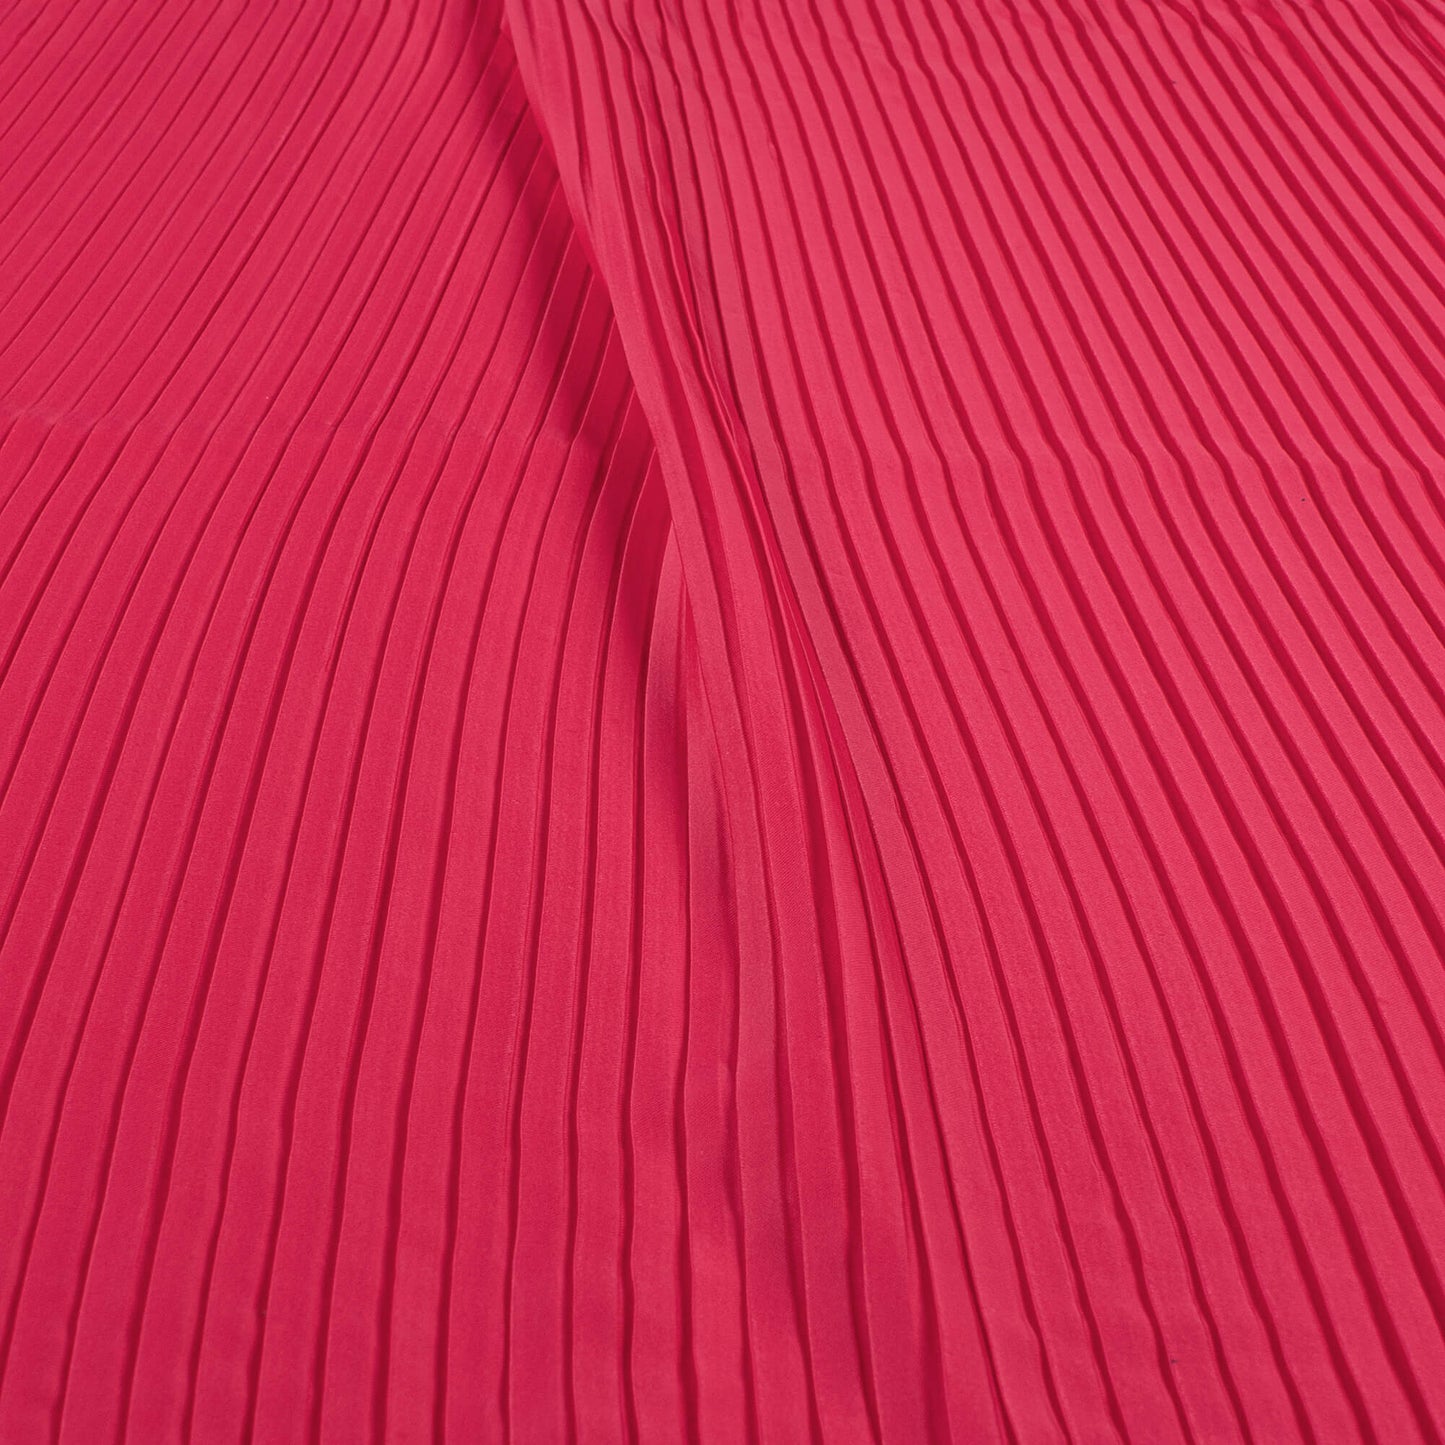 Classic Hot Pink Plain Pleated Imported Satin Fabric